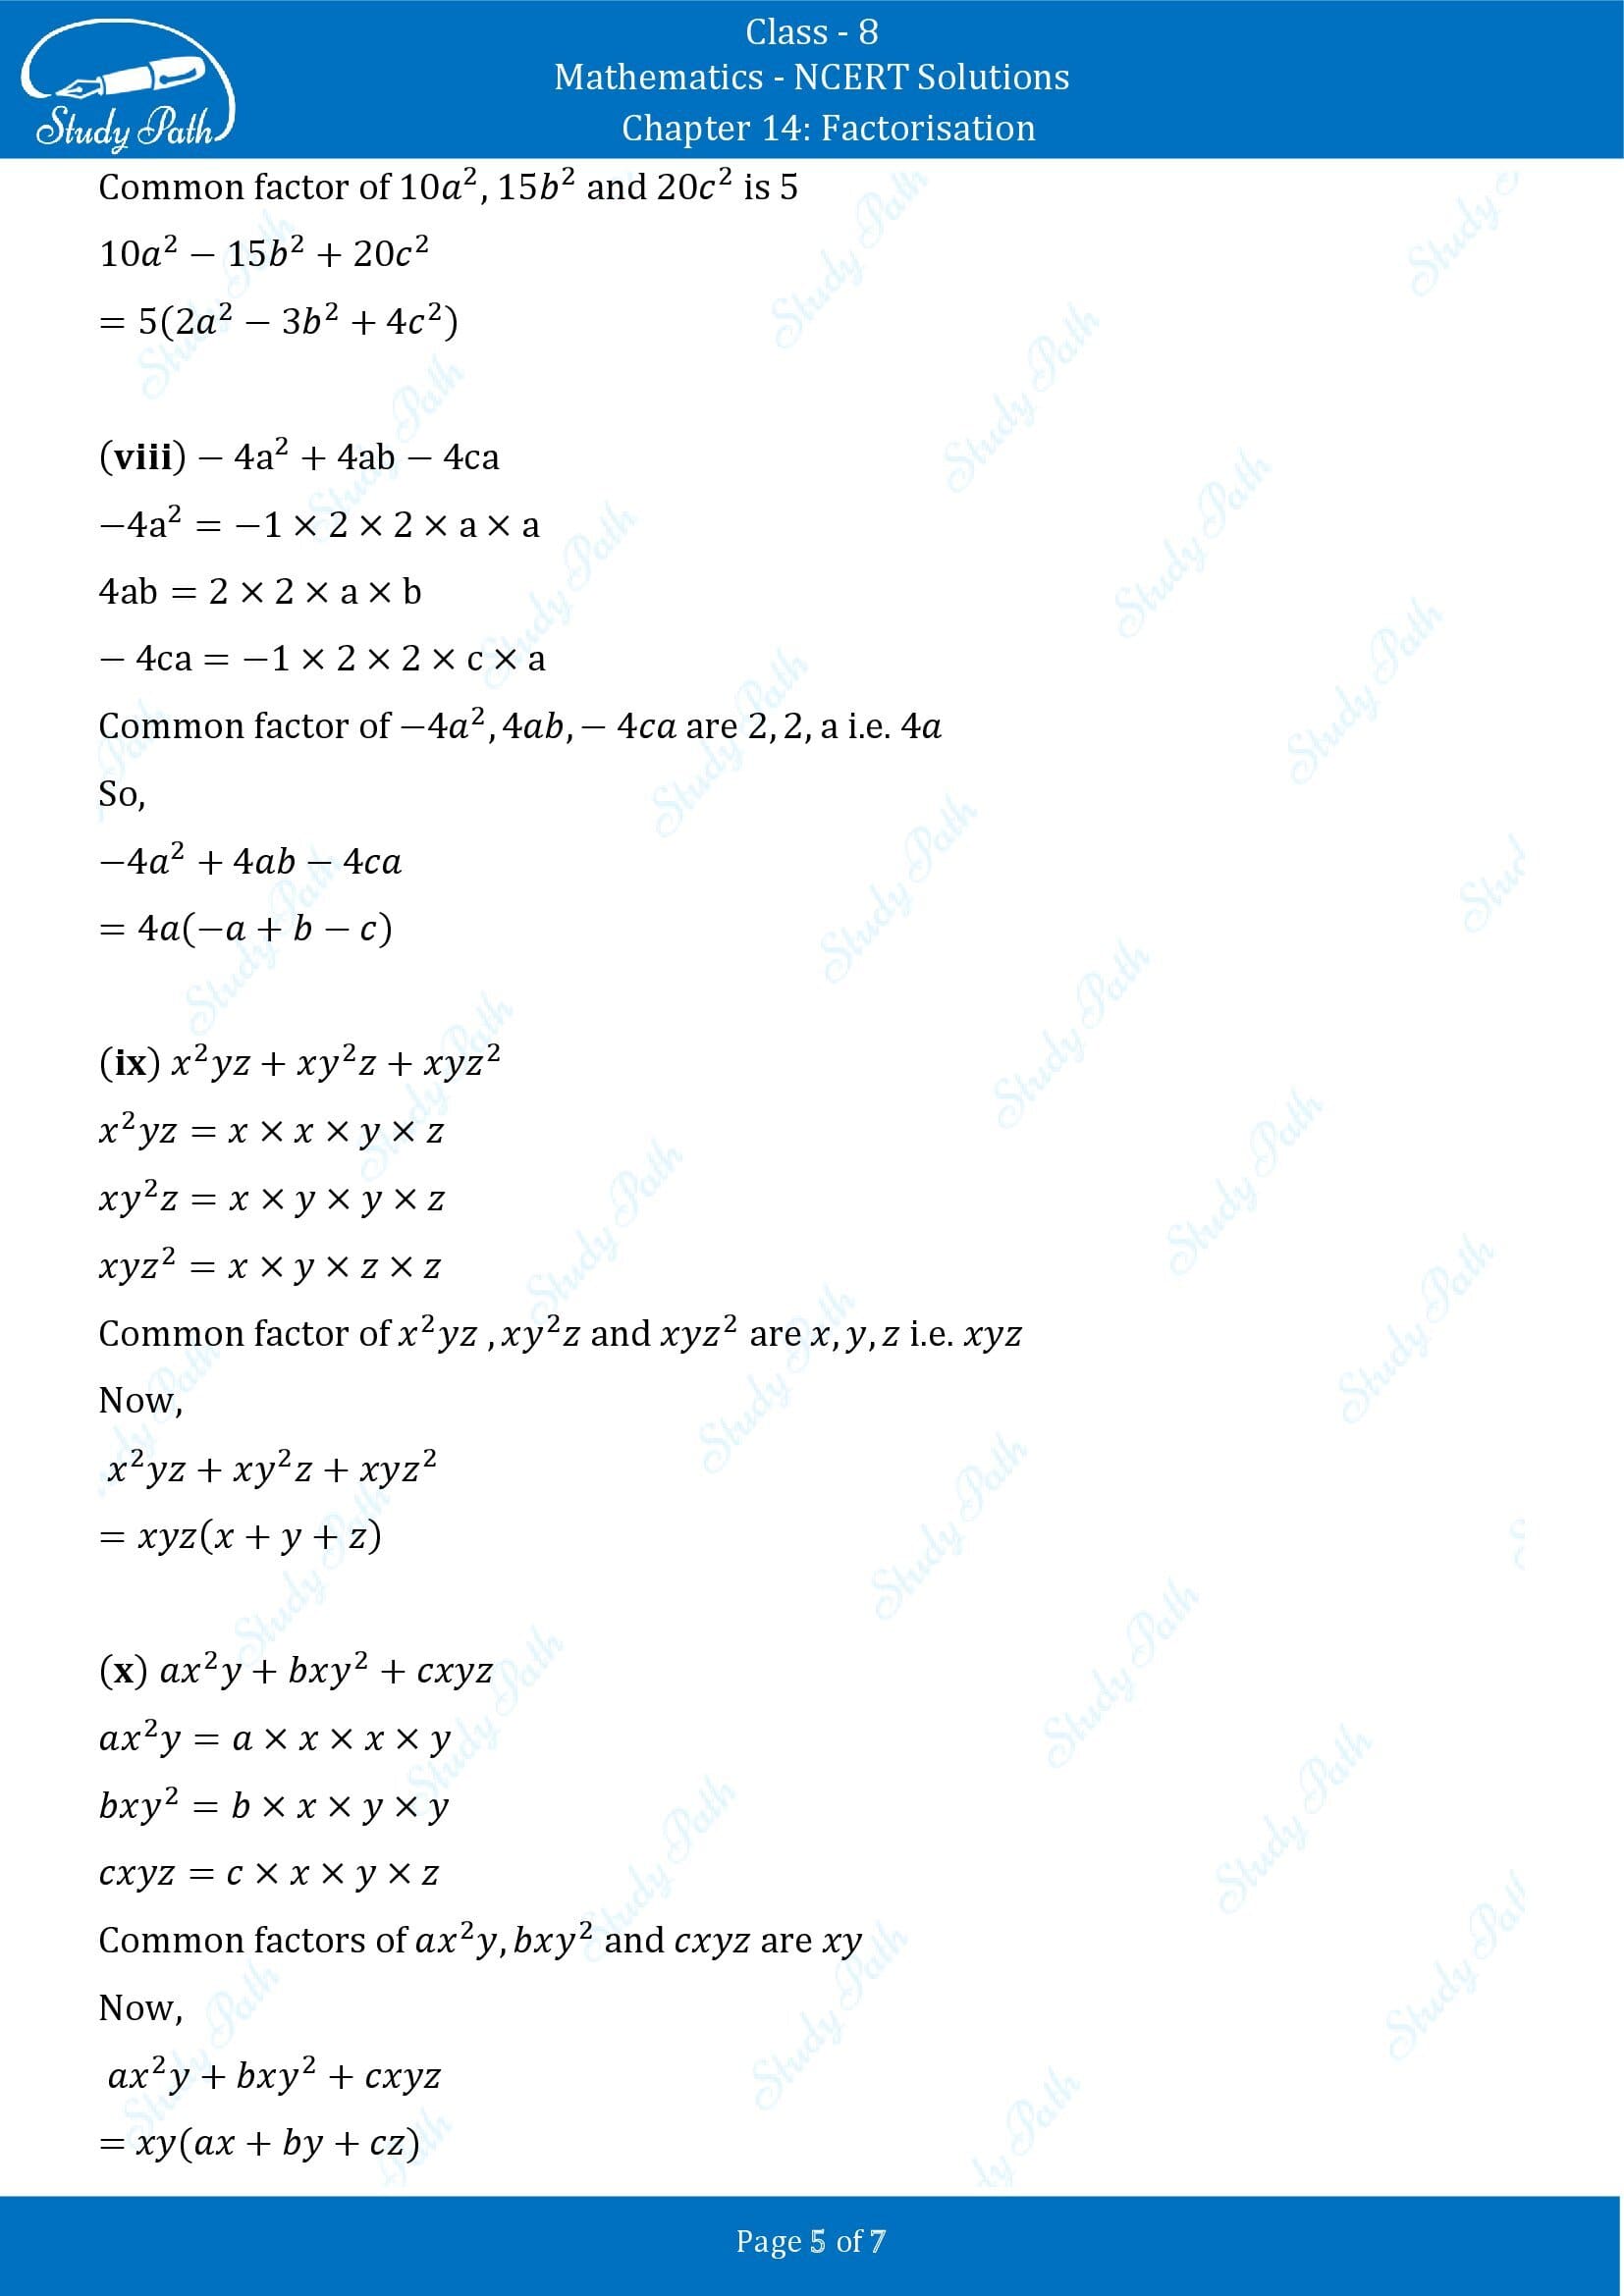 NCERT Solutions for Class 8 Maths Chapter 14 Factorisation Exercise 14.1 00005